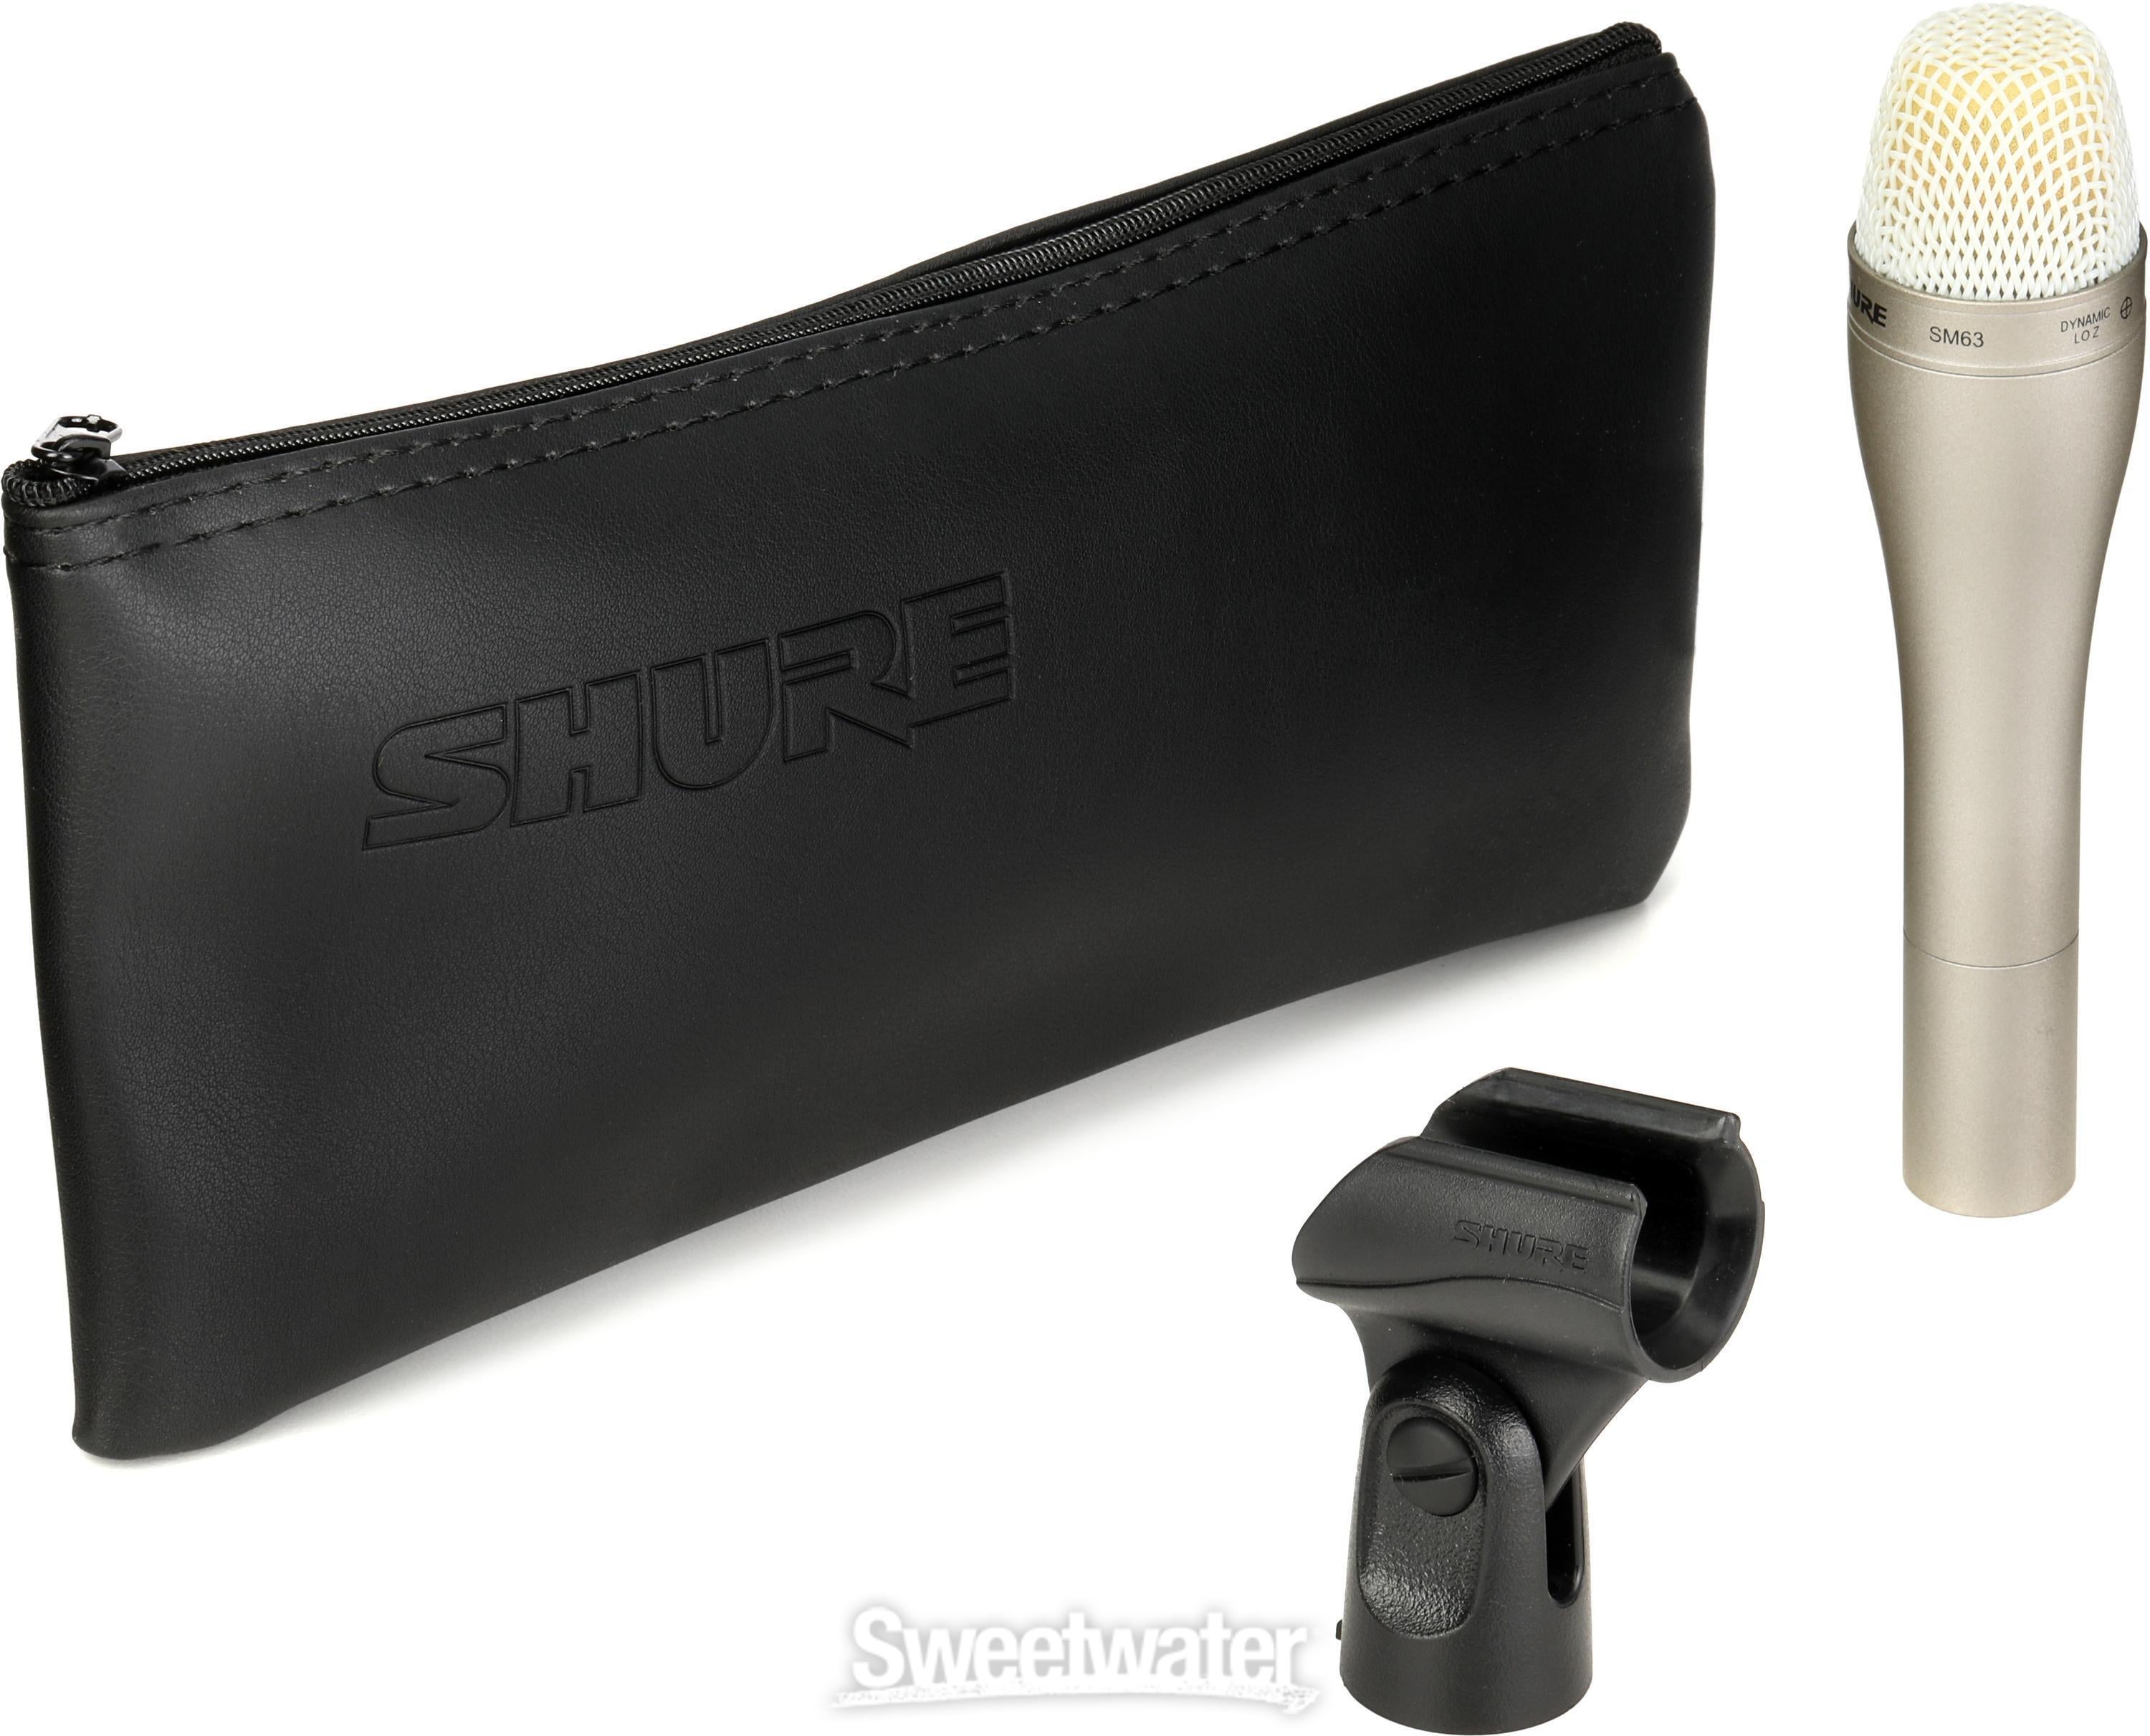 Shure SM63 Omnidirectional Dynamic Vocal Microphone | Sweetwater